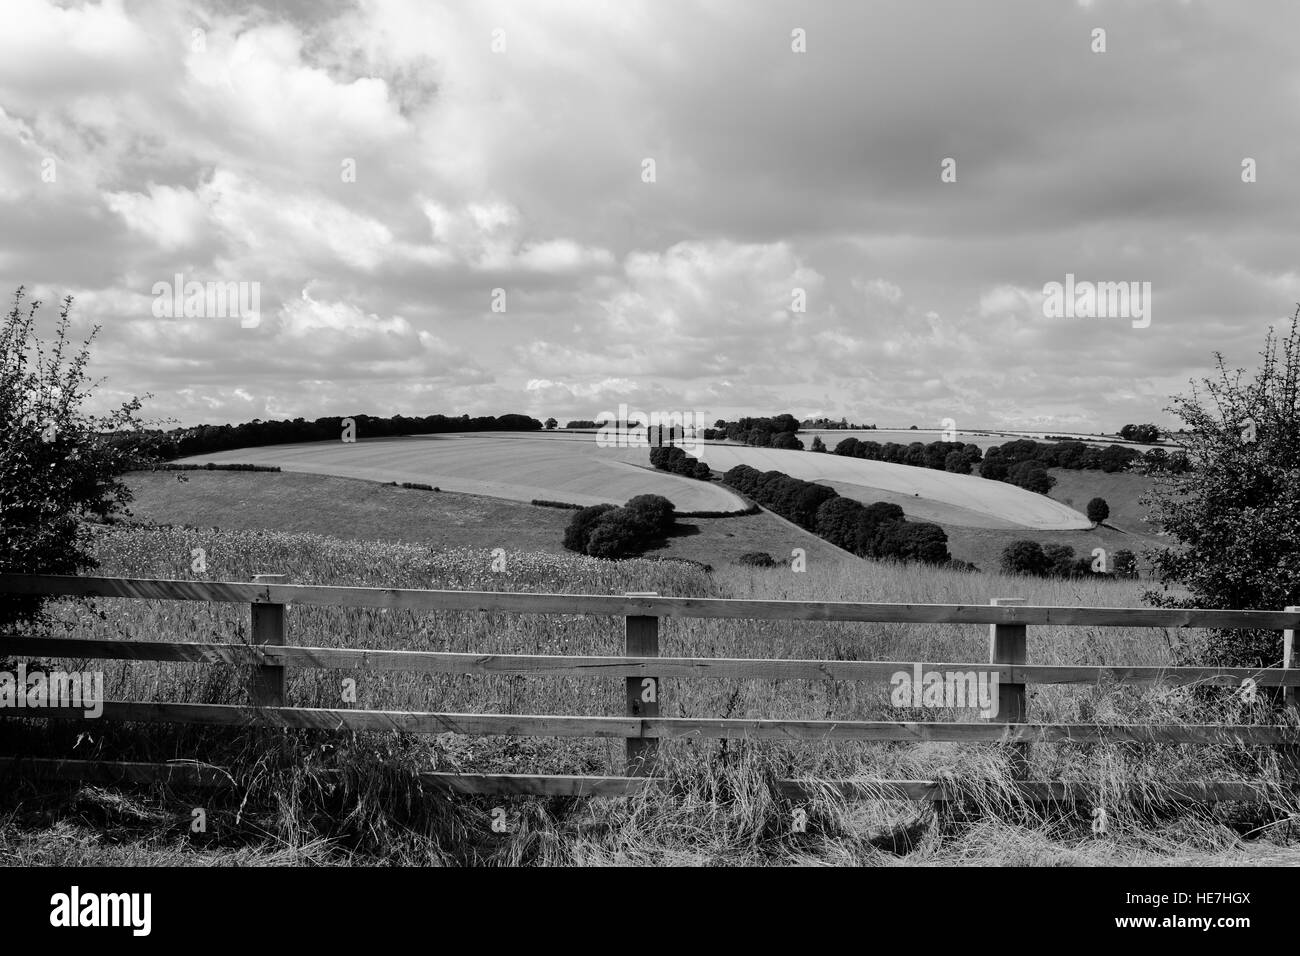 Monochrome English landscape with patterns and textures of the scenic patchwork fields of  the Yorkshire wolds in summertime. Stock Photo